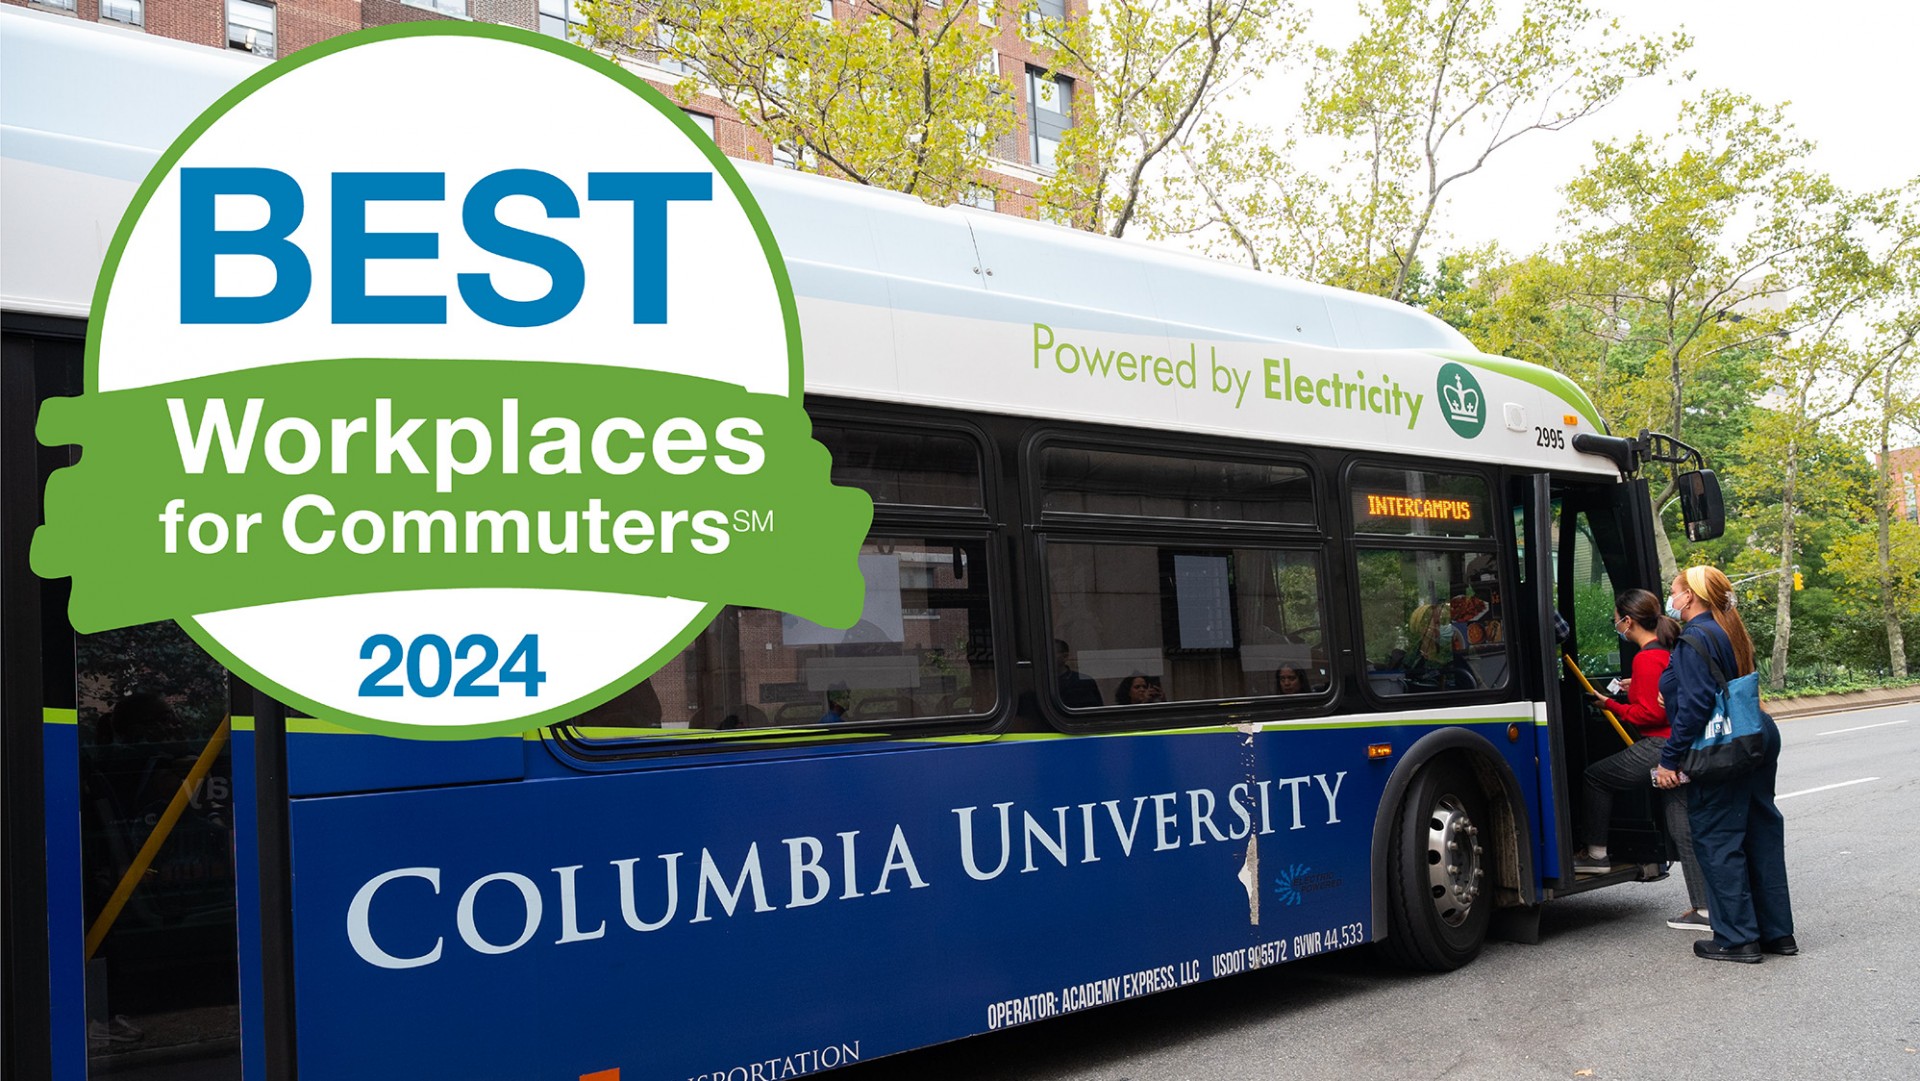 Best Workplaces for Commuters 2024 logo over an image of the Columbia University shuttle bus picking up passengers at a Manhattan bus stop